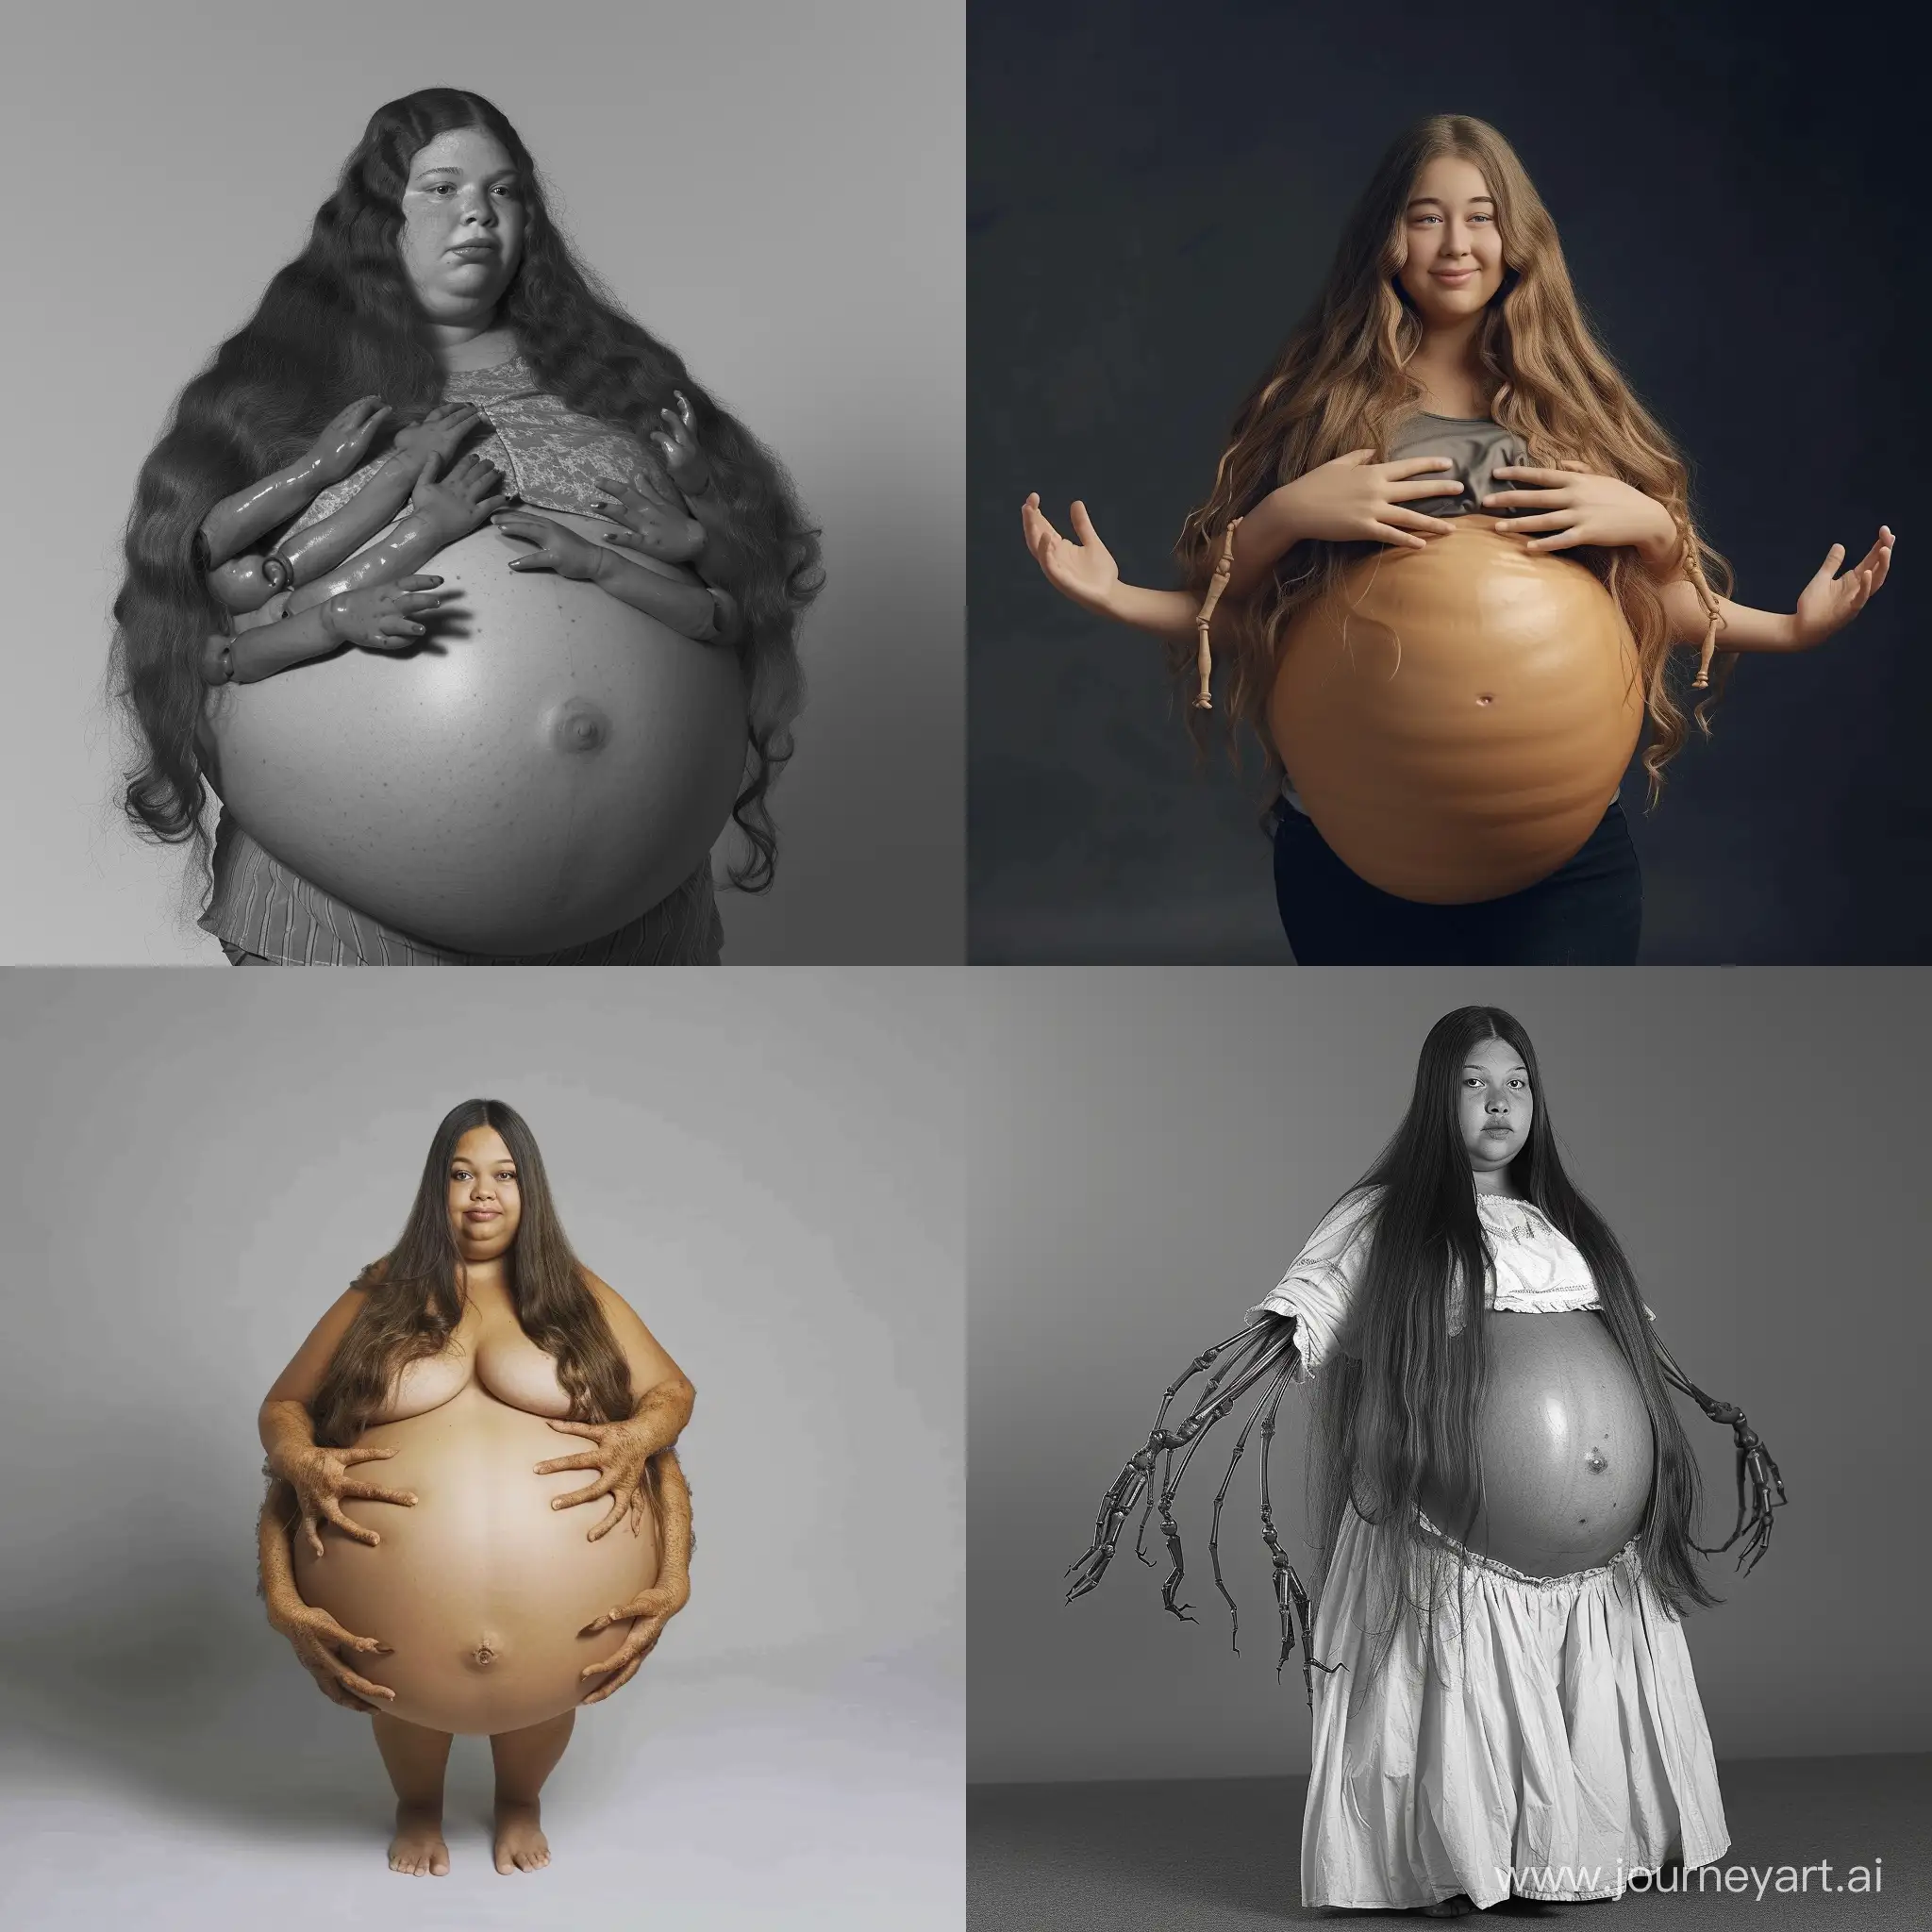 Make a real girl who is fat and has 4 arms sticking out of her belly and long hair
